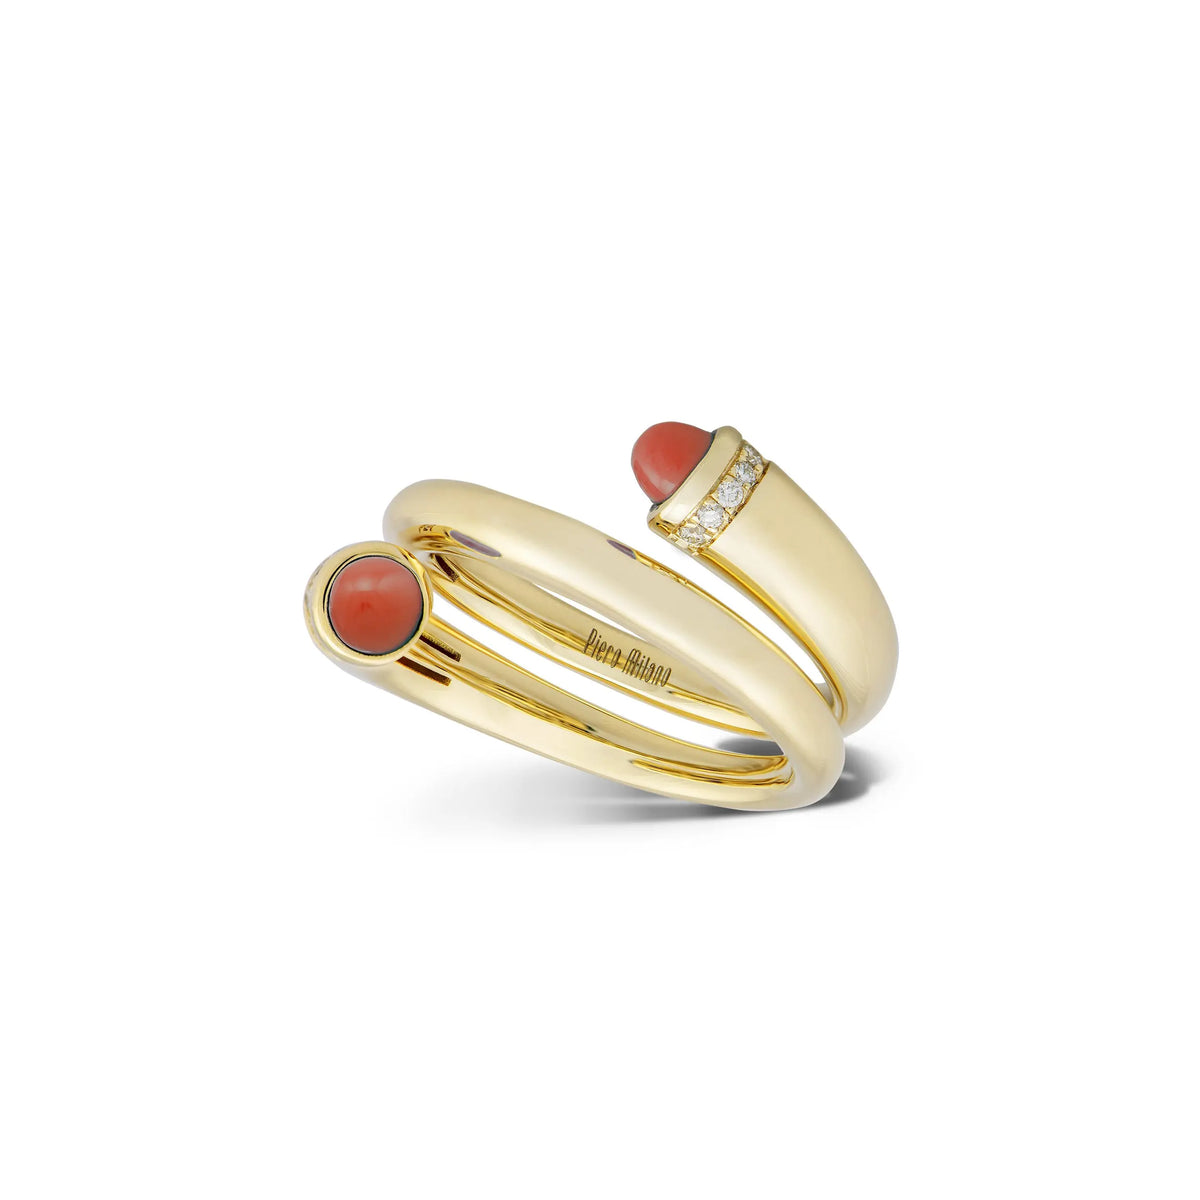 Contrarié ring with coral ad diamonds  18k yellow gold with coral and diamond wrap ring  .20 cttw coral and .07 cttw diamonds  Ring Size: 6.5  If you need a different size, please email shop@sbvail.com  Designed by Piero Milano